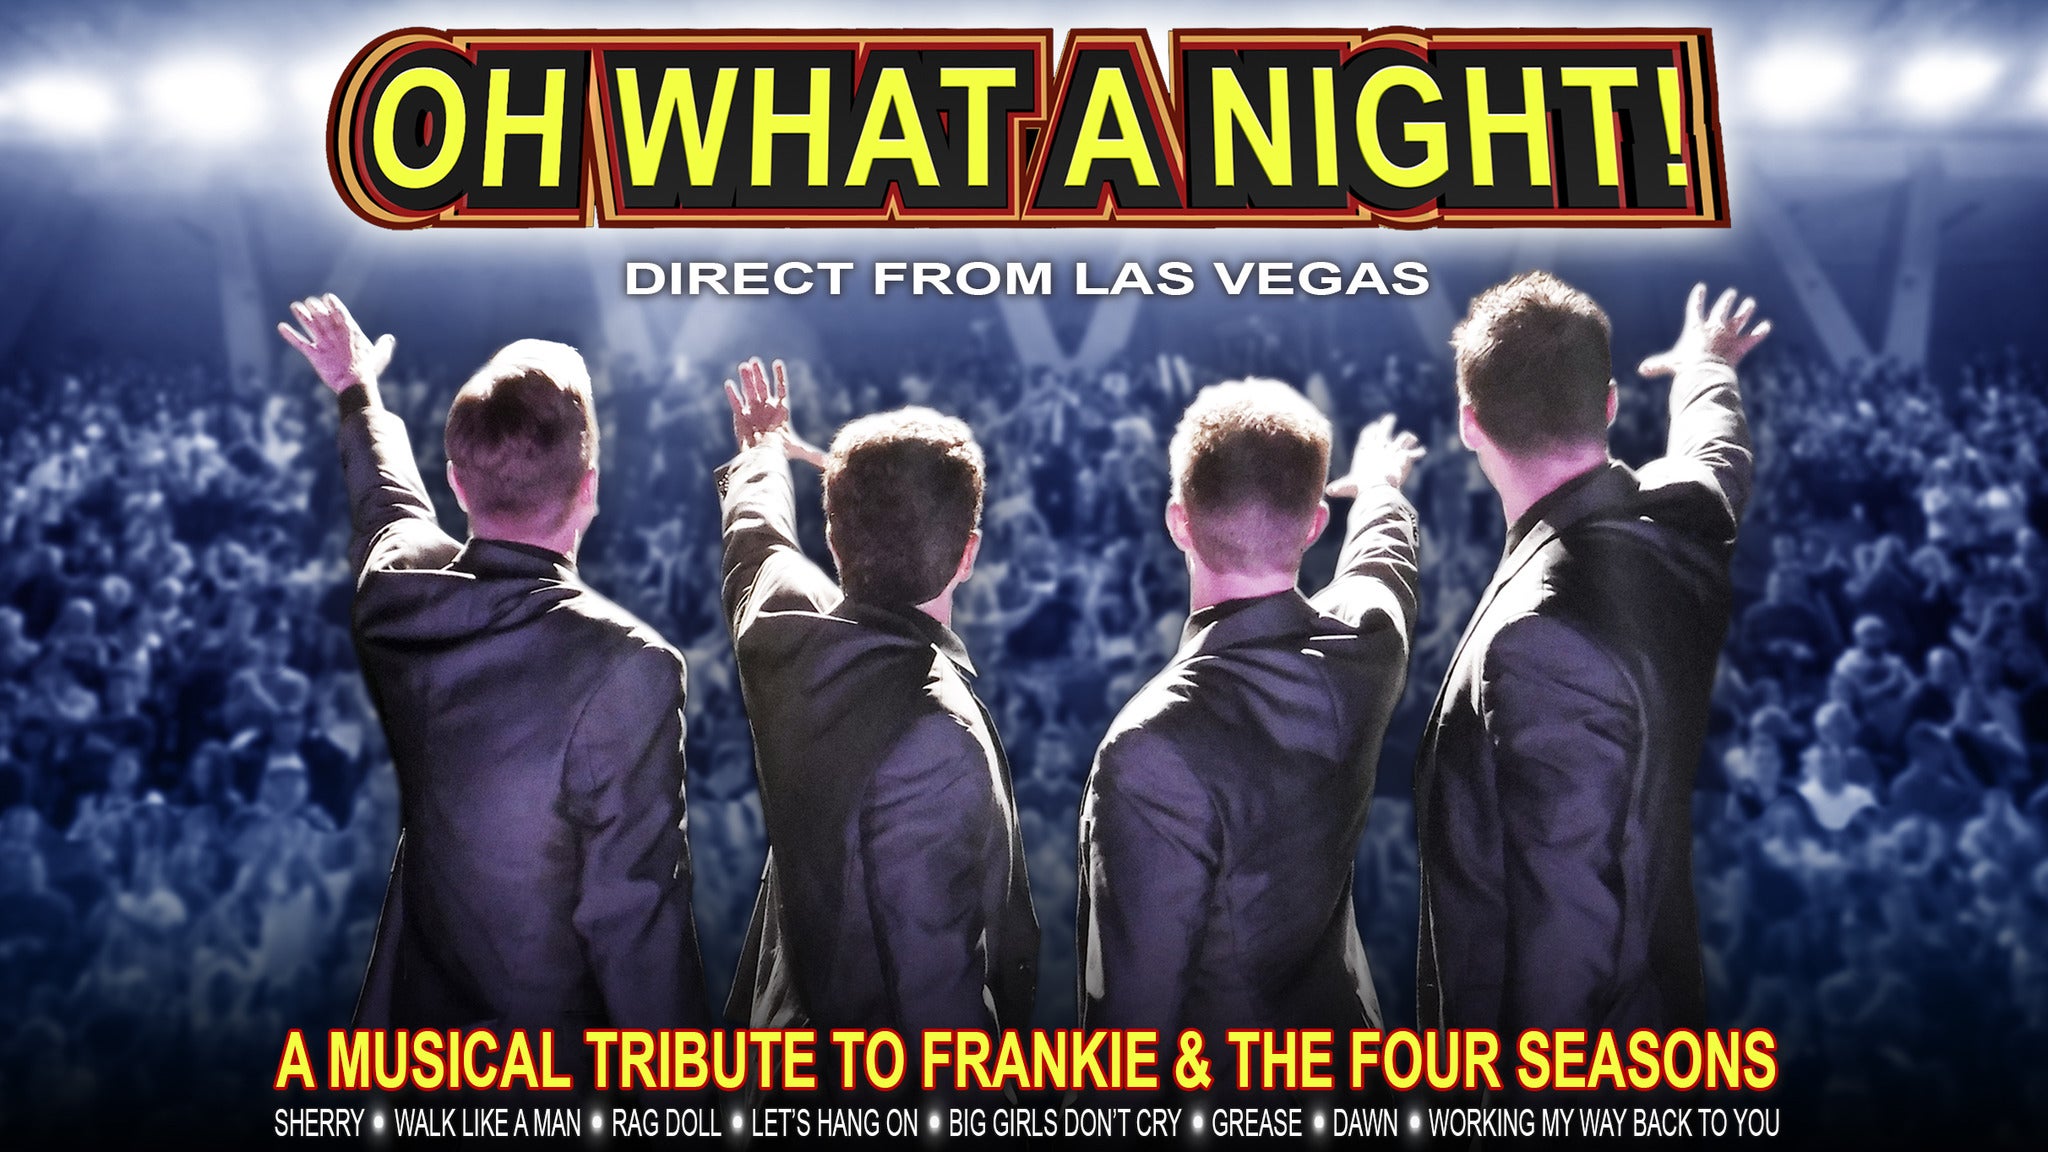 "Oh What A Night!" A Musical Tribute to Frankie Valli in Rama promo photo for Casino Rama Facebook Fan presale offer code